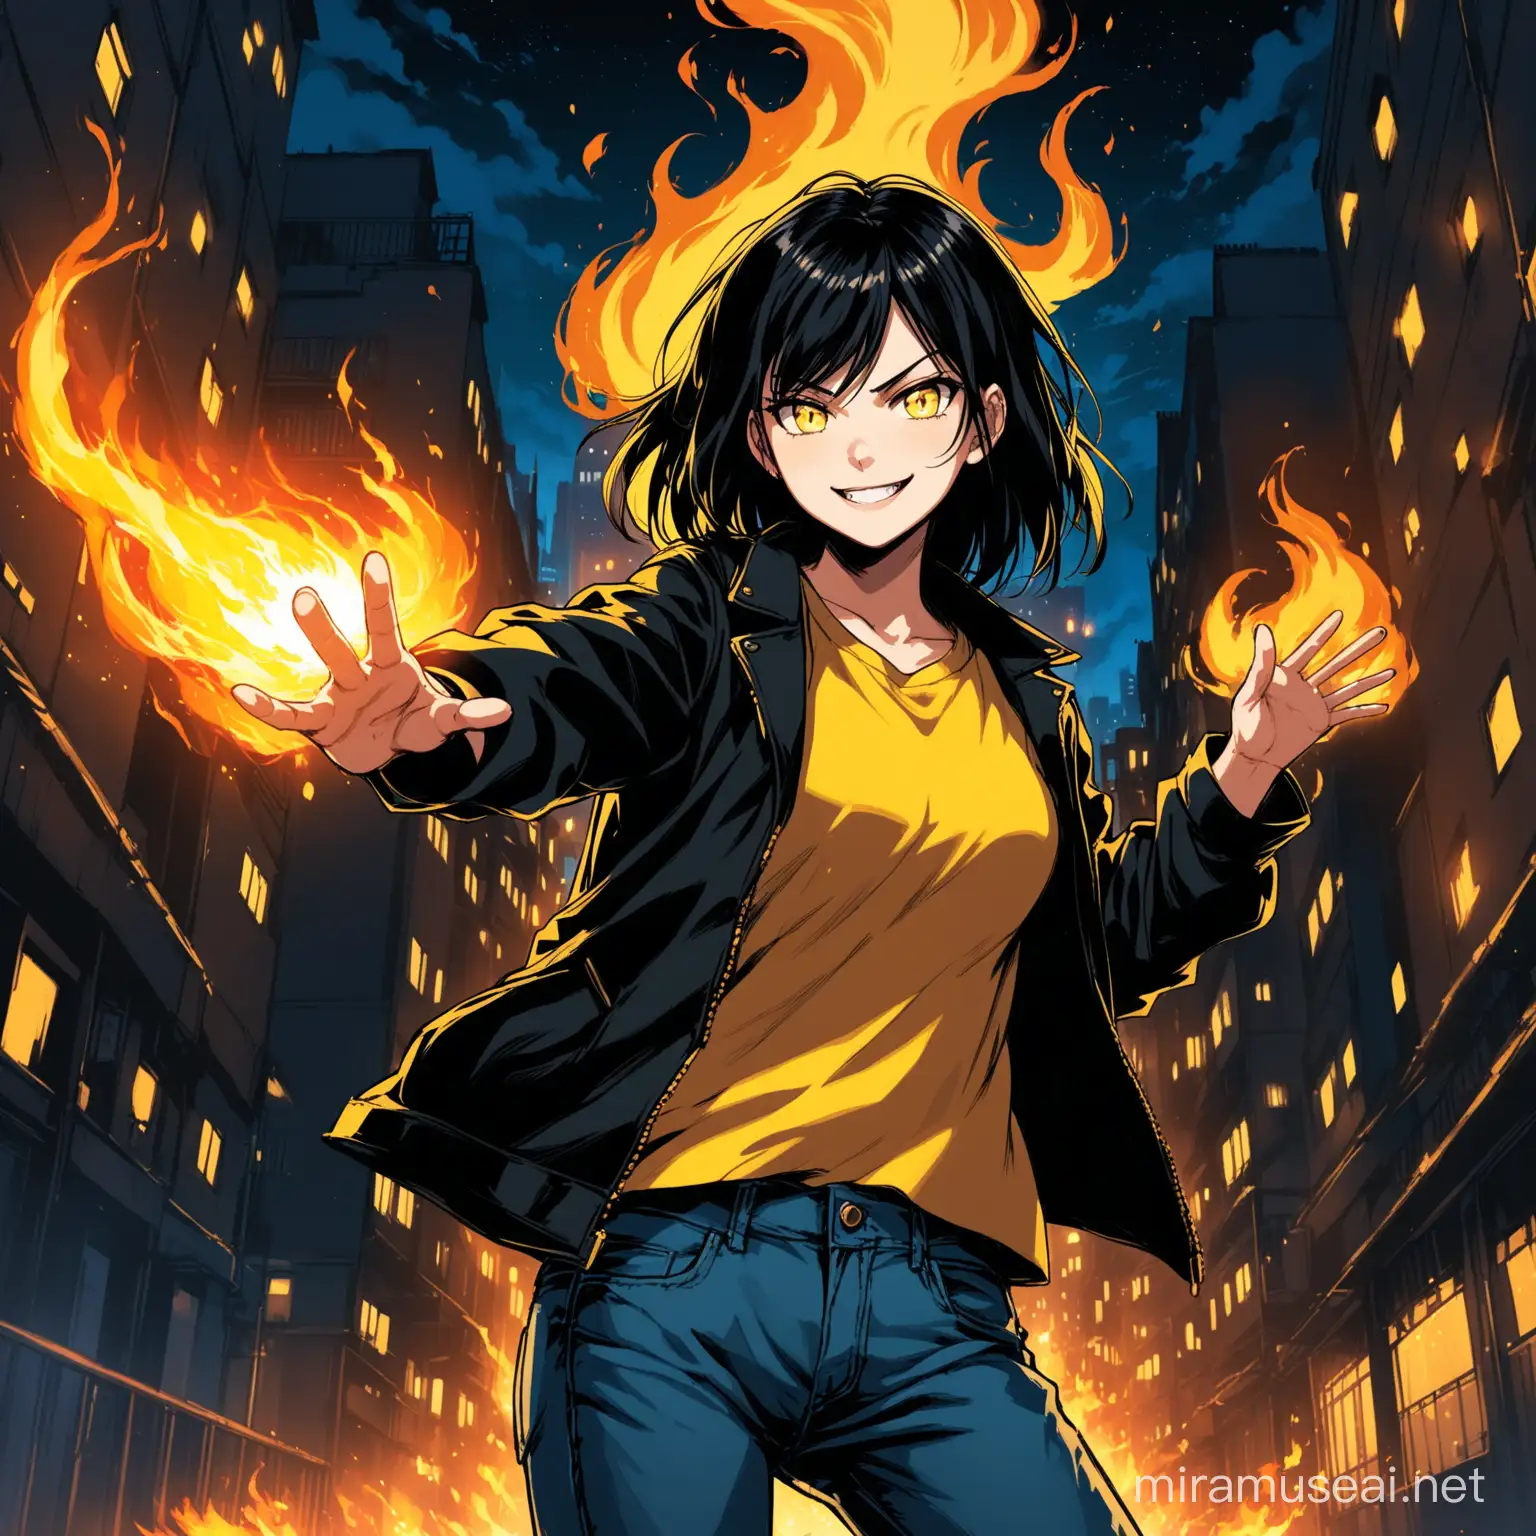 Sinister Teenage Tomboy Conjures Fire in Urban Night